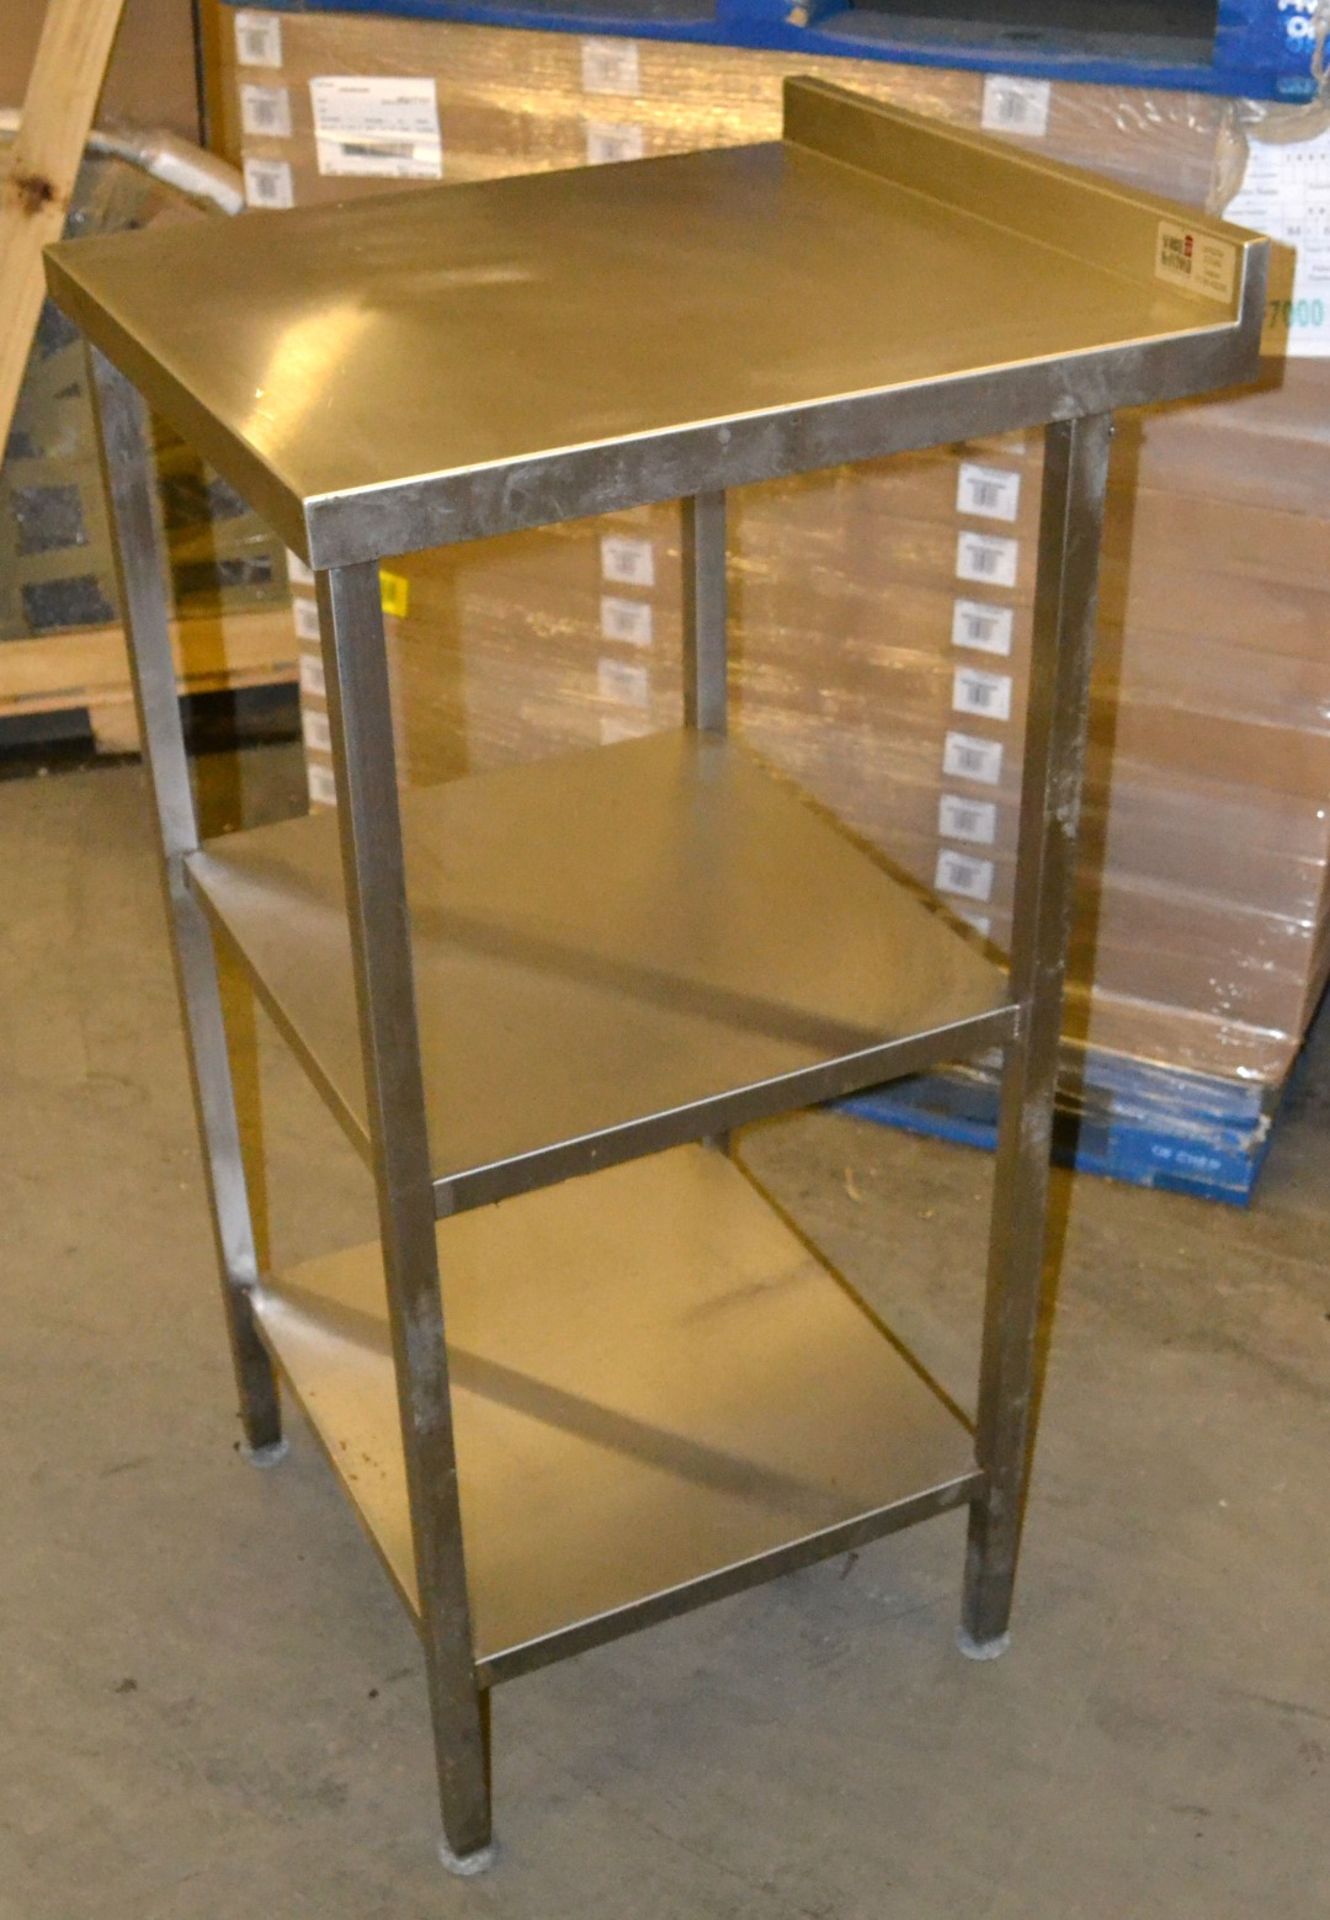 1 x Tall Stainless Steel Scobie McIntosh Prep Table - Dimensions: 60 x 65 x 124cm - Ref: MC115 - CL2 - Image 4 of 8